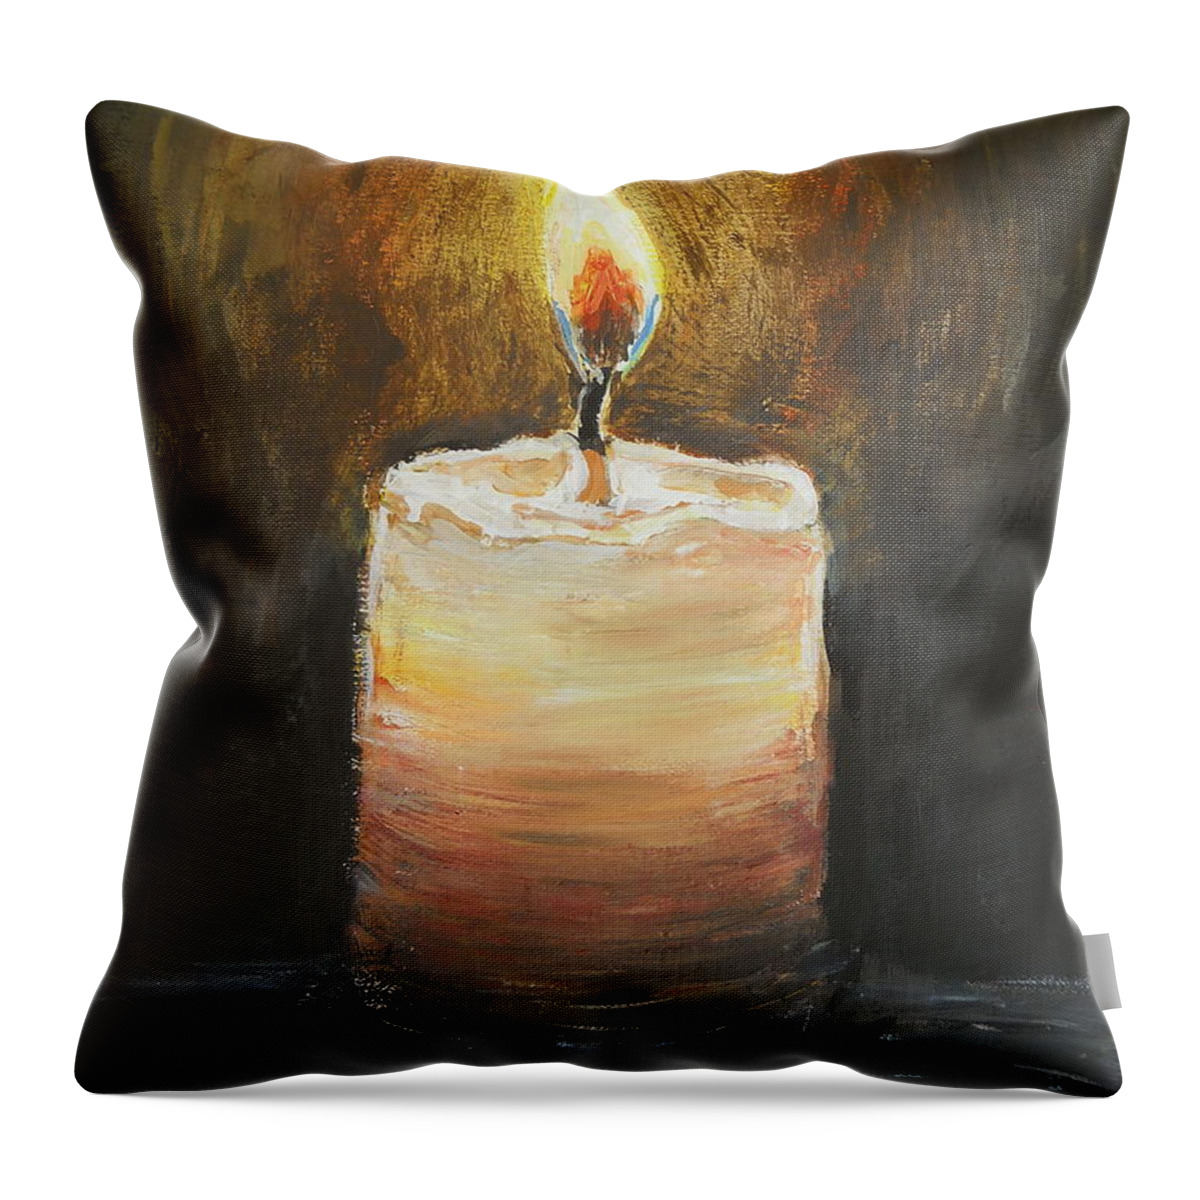 Candle Throw Pillow featuring the painting Candle by Sheena Kohlmeyer